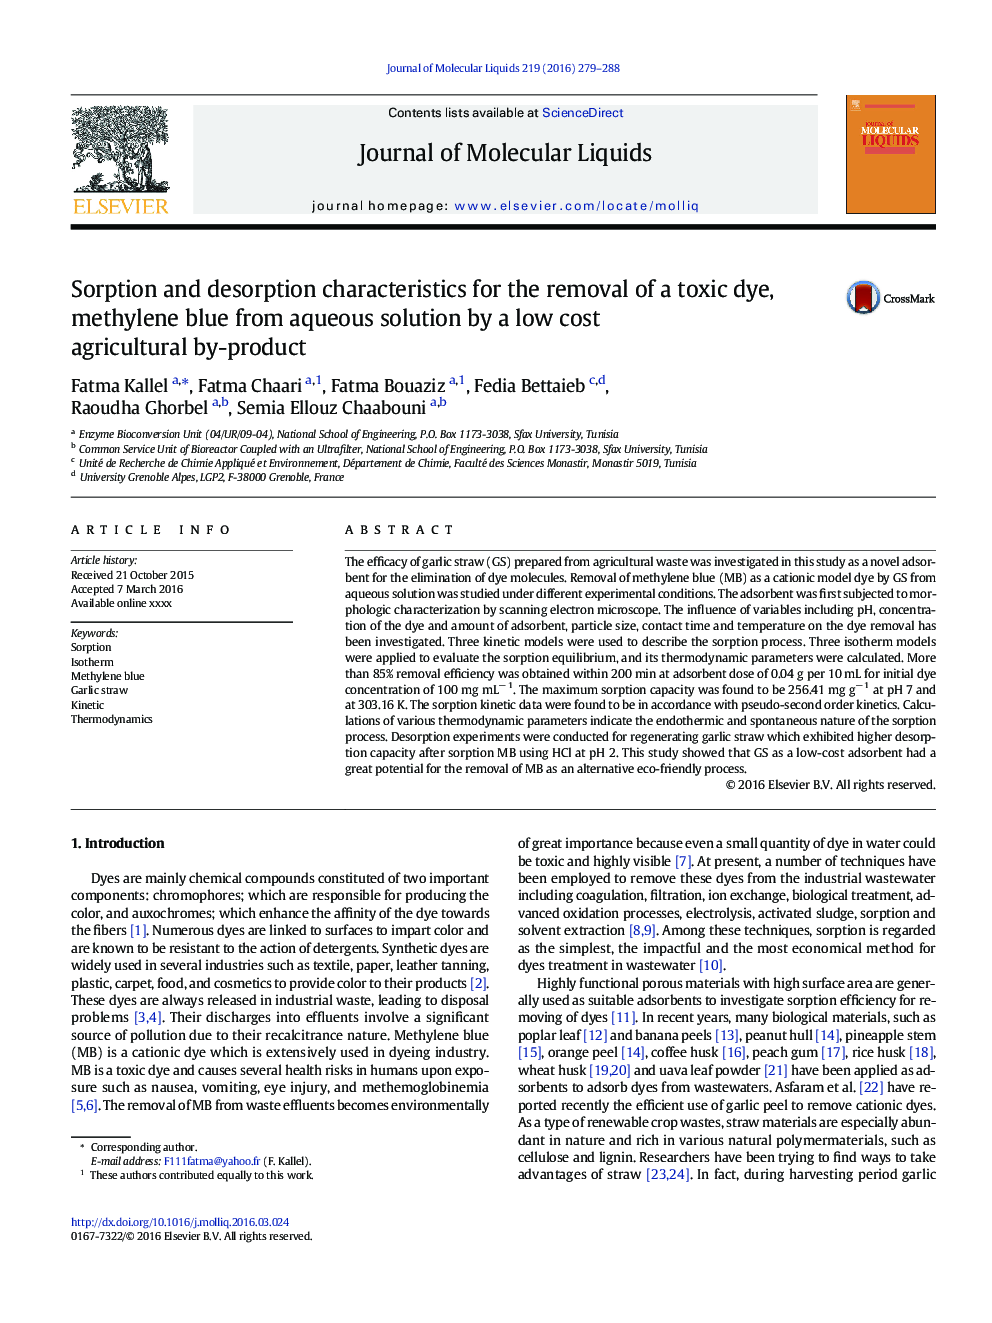 Sorption and desorption characteristics for the removal of a toxic dye, methylene blue from aqueous solution by a low cost agricultural by-product